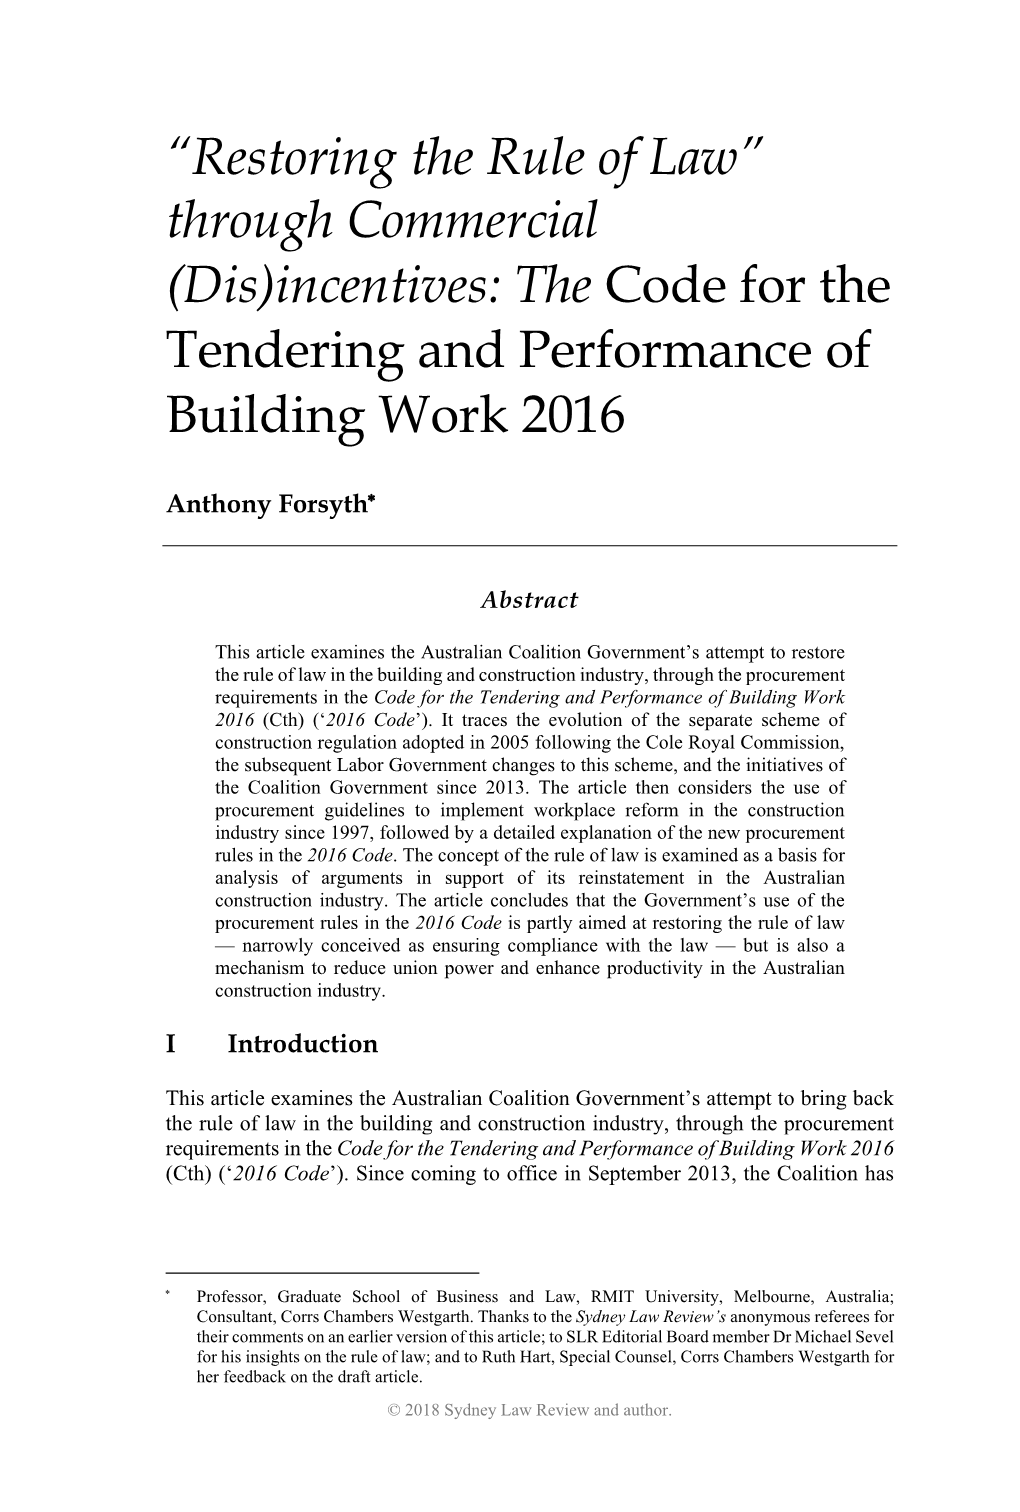 The Code for the Tendering and Performance of Building Work 2016